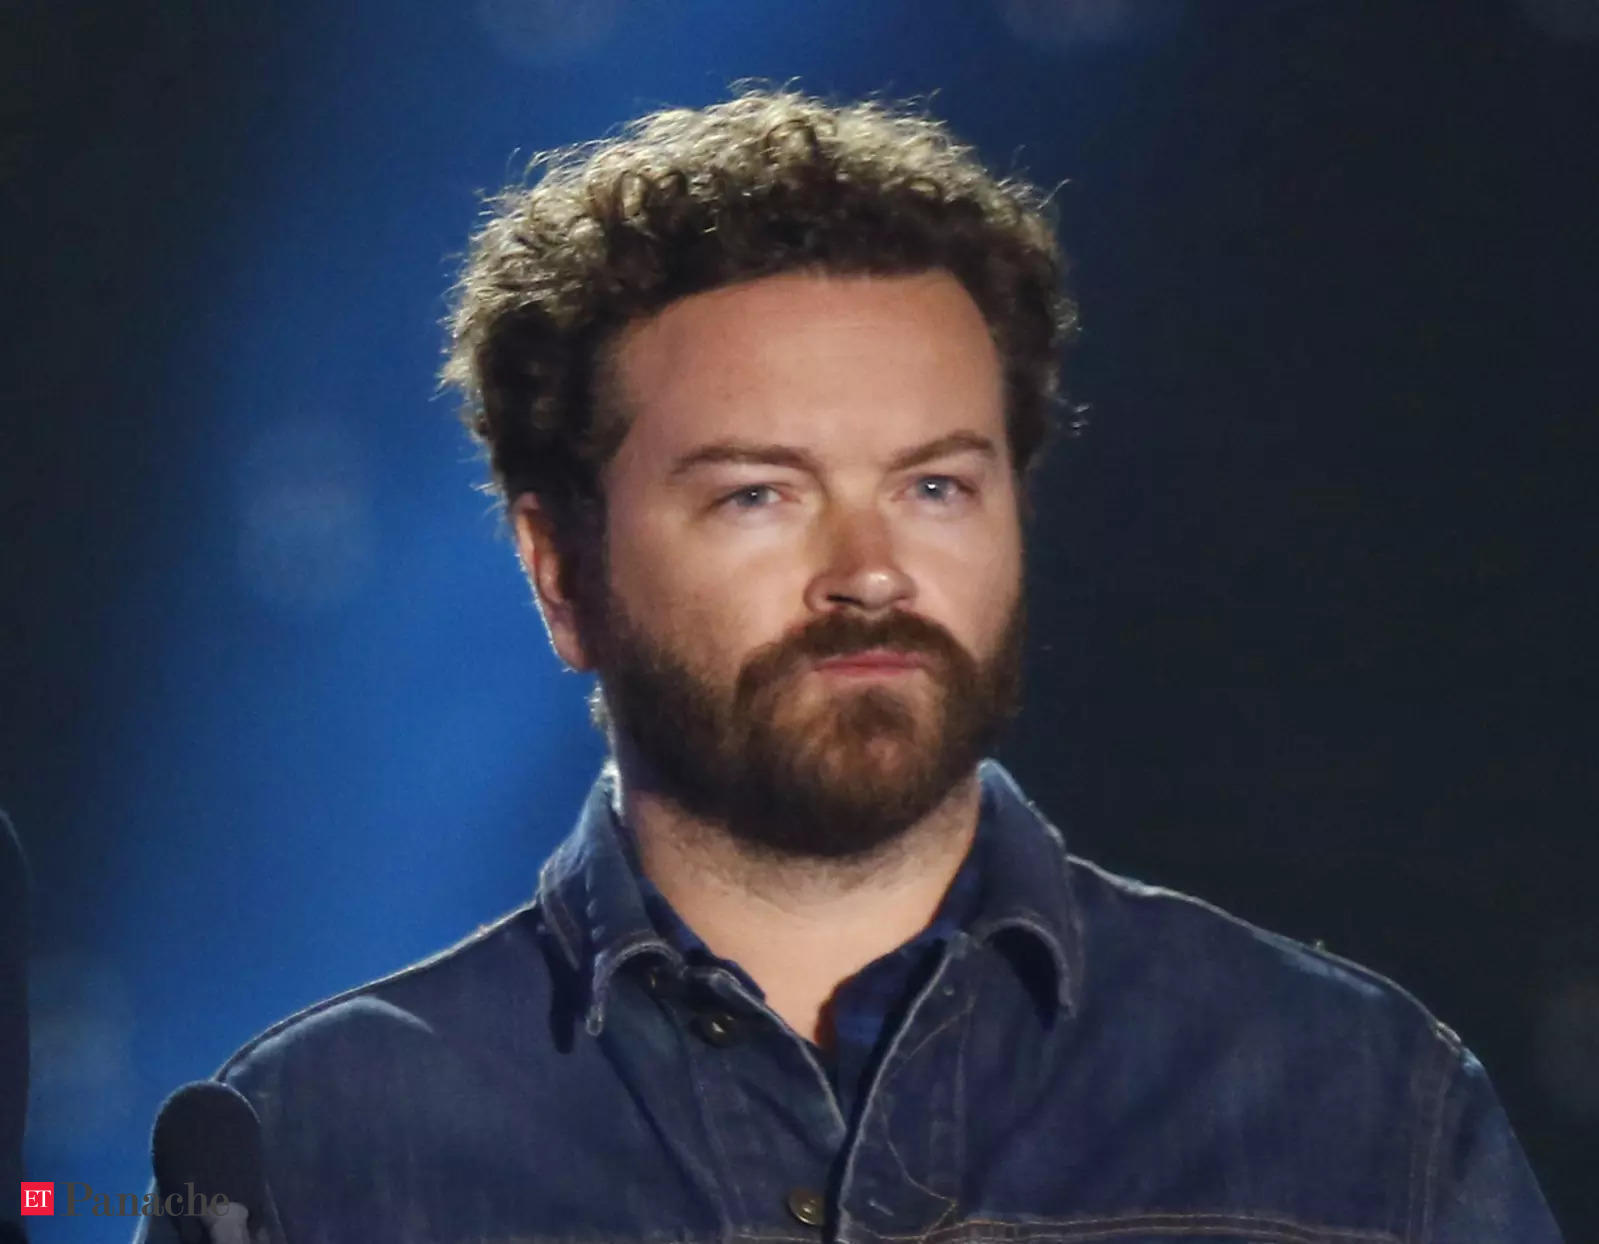 Rape allegations against 'That '70s Show' star Danny Masterson contain some disturbing elements - The Economic Times